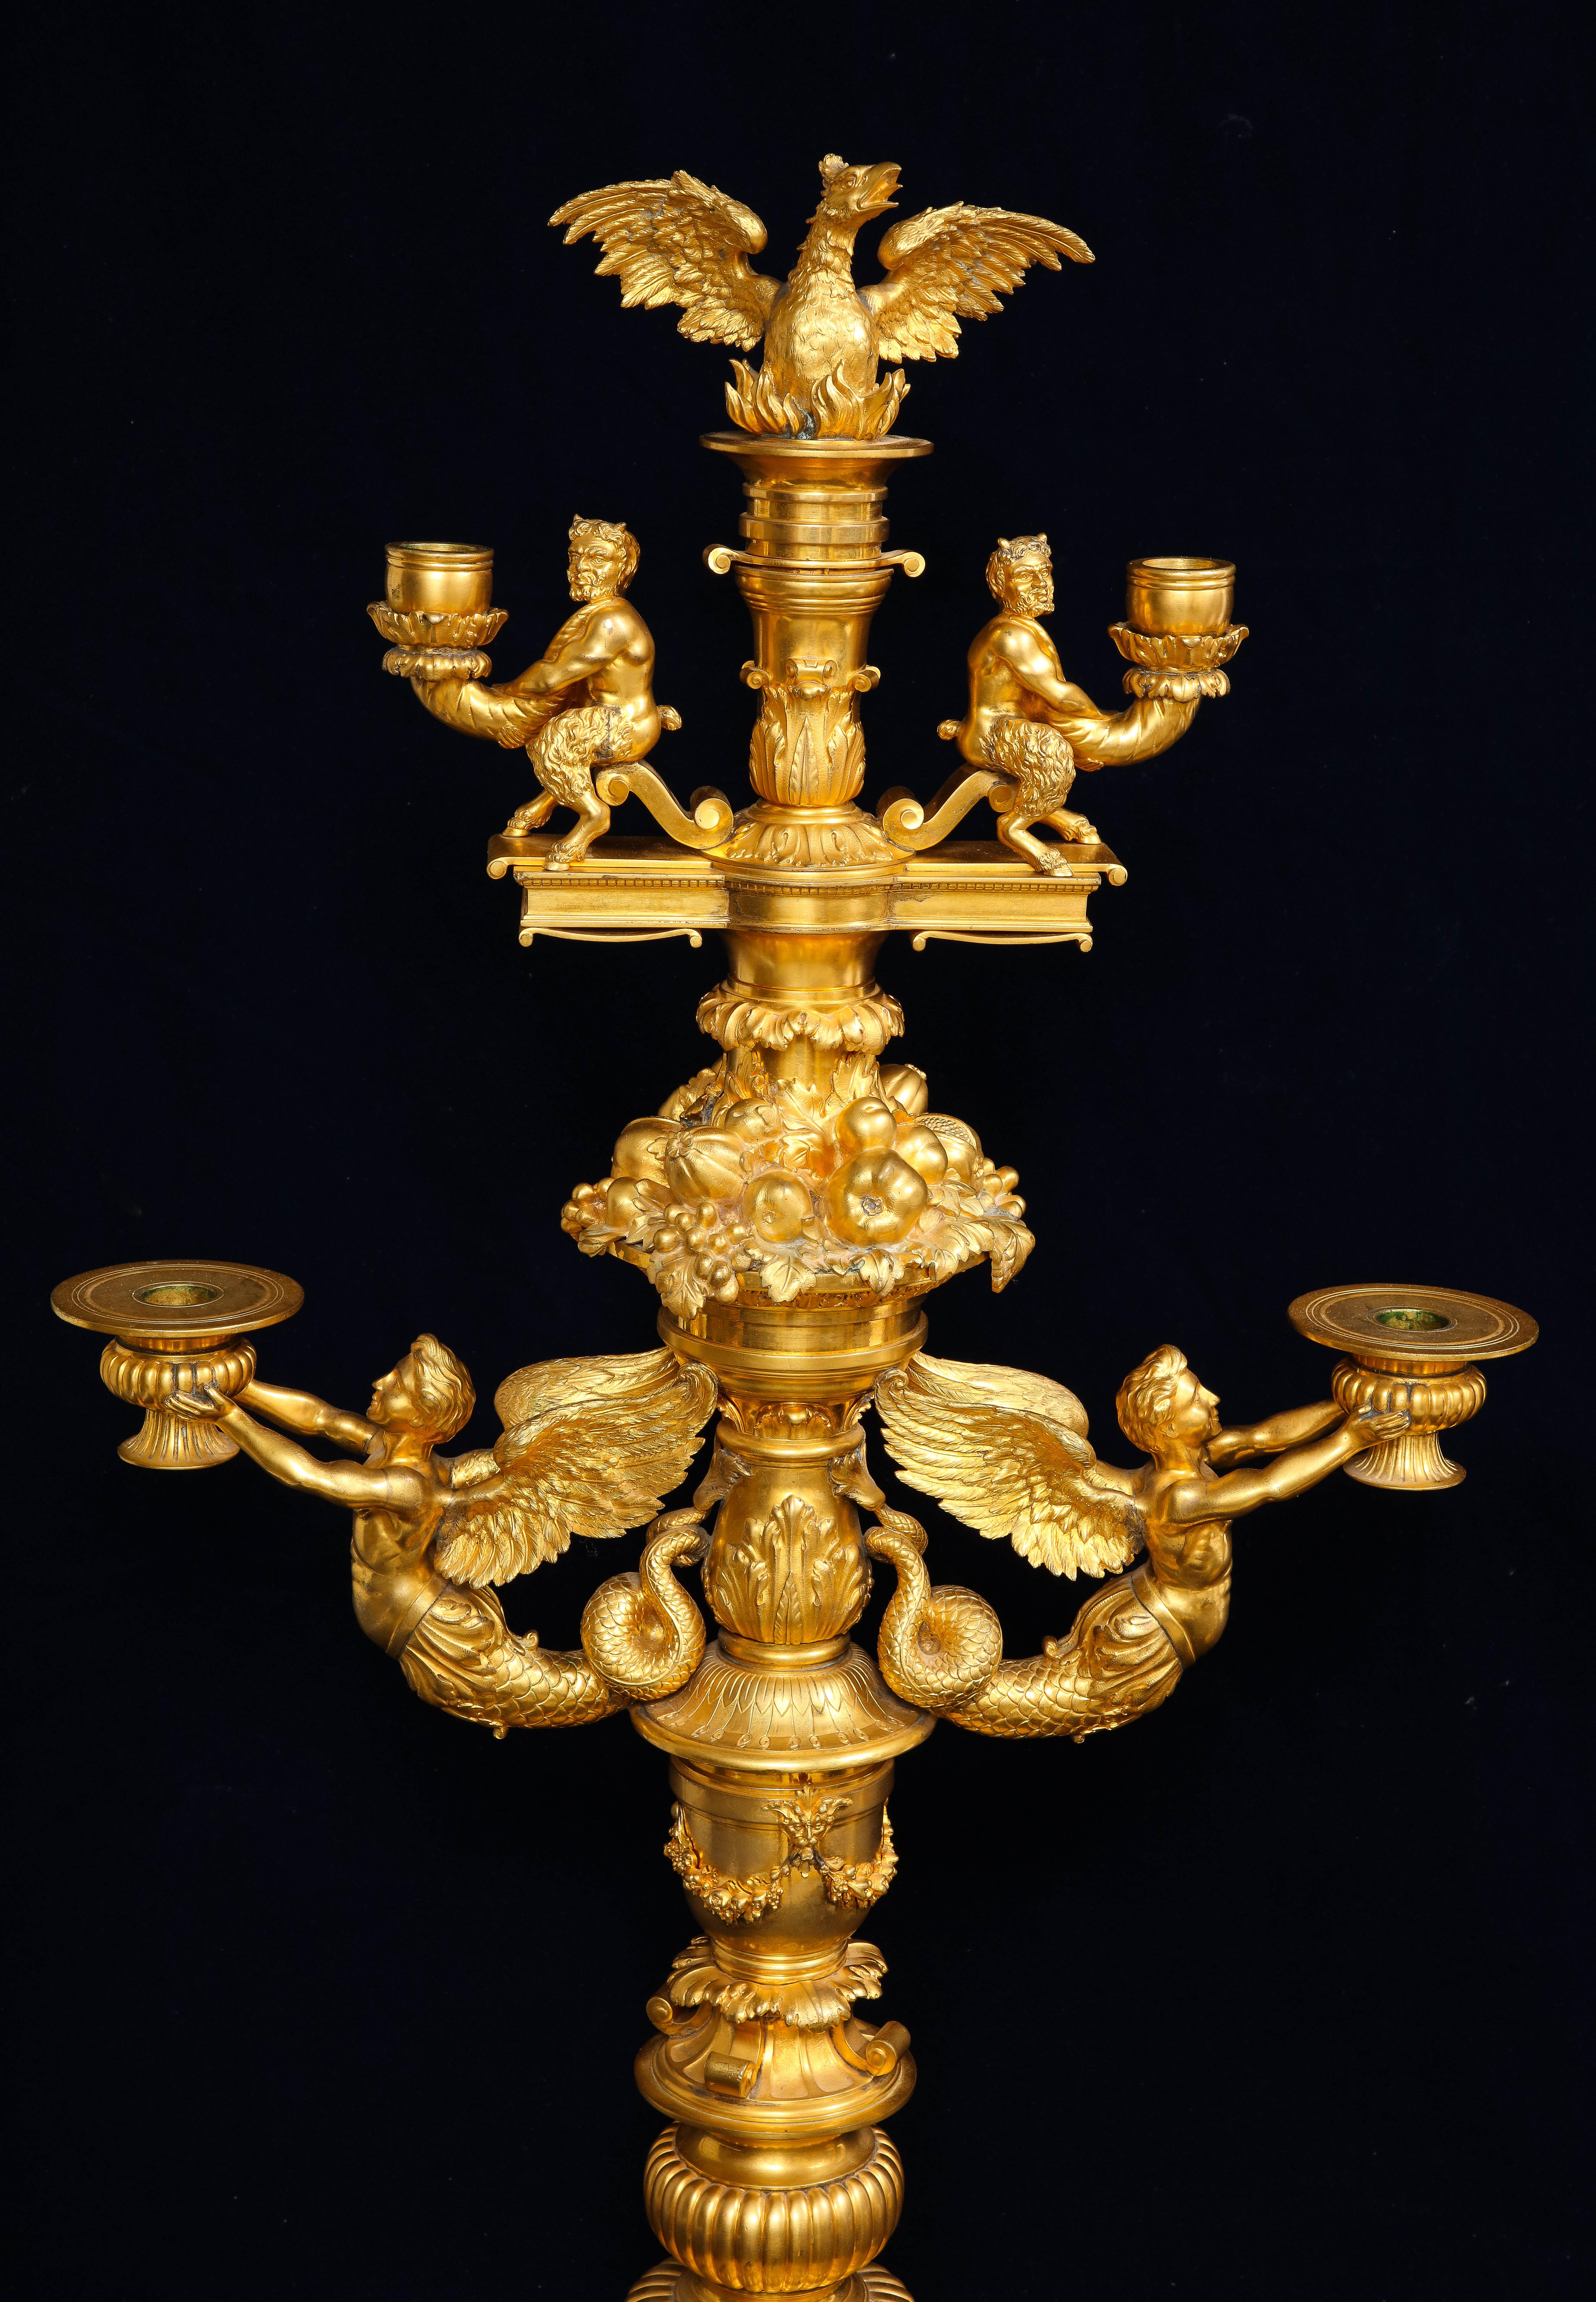 Marvelous Pair of 19th C. French Ormolu Four Arm Candelabras, Signed P. Canaux For Sale 2